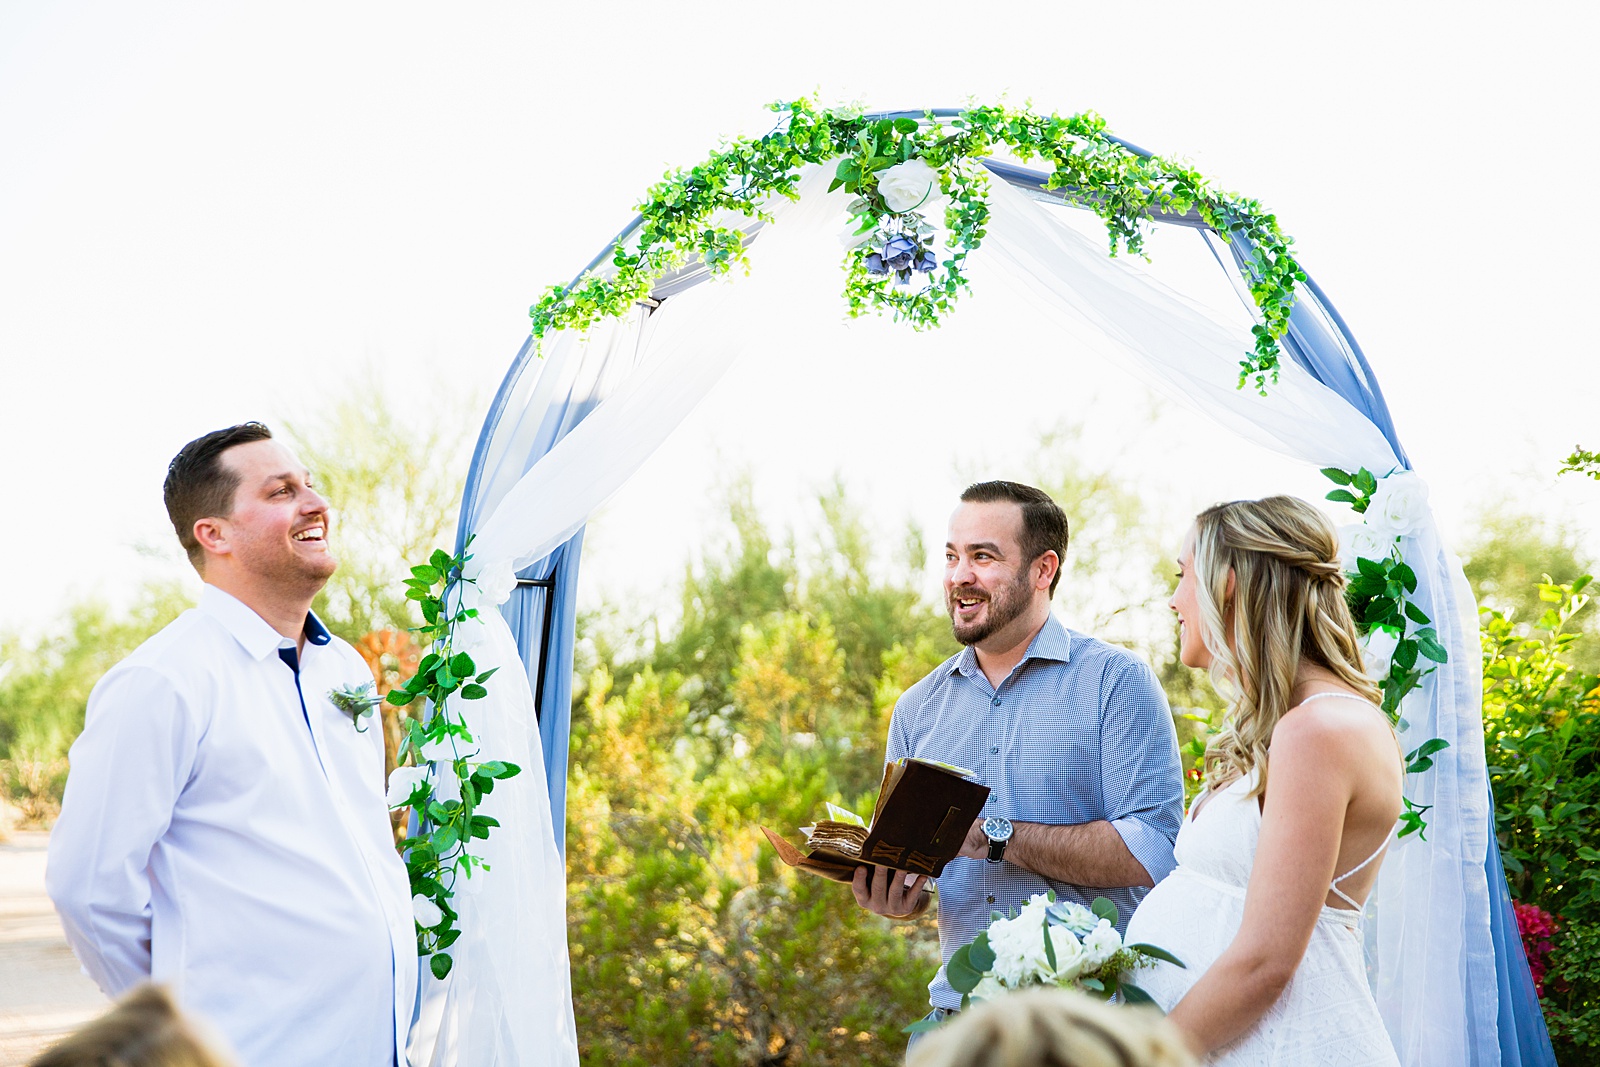 Bride and groom laughing together during their backyard garden elopement by Arizona wedding photographer PMA Photography.